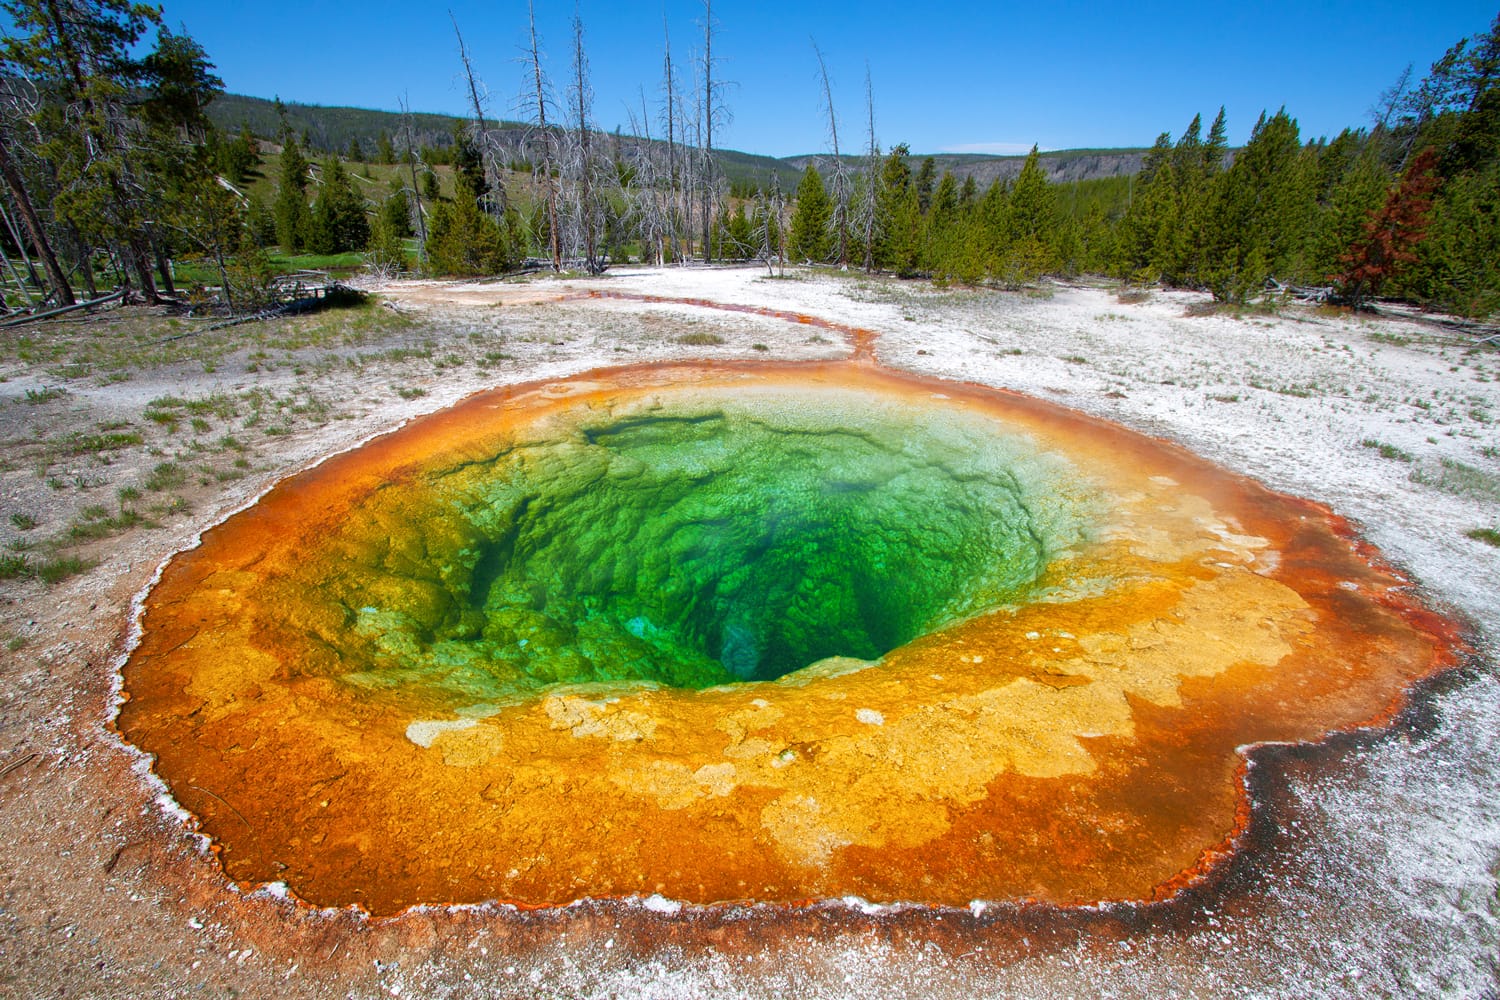 Morning Glory Thermal Pool in Yellowstone National Park, Wyoming